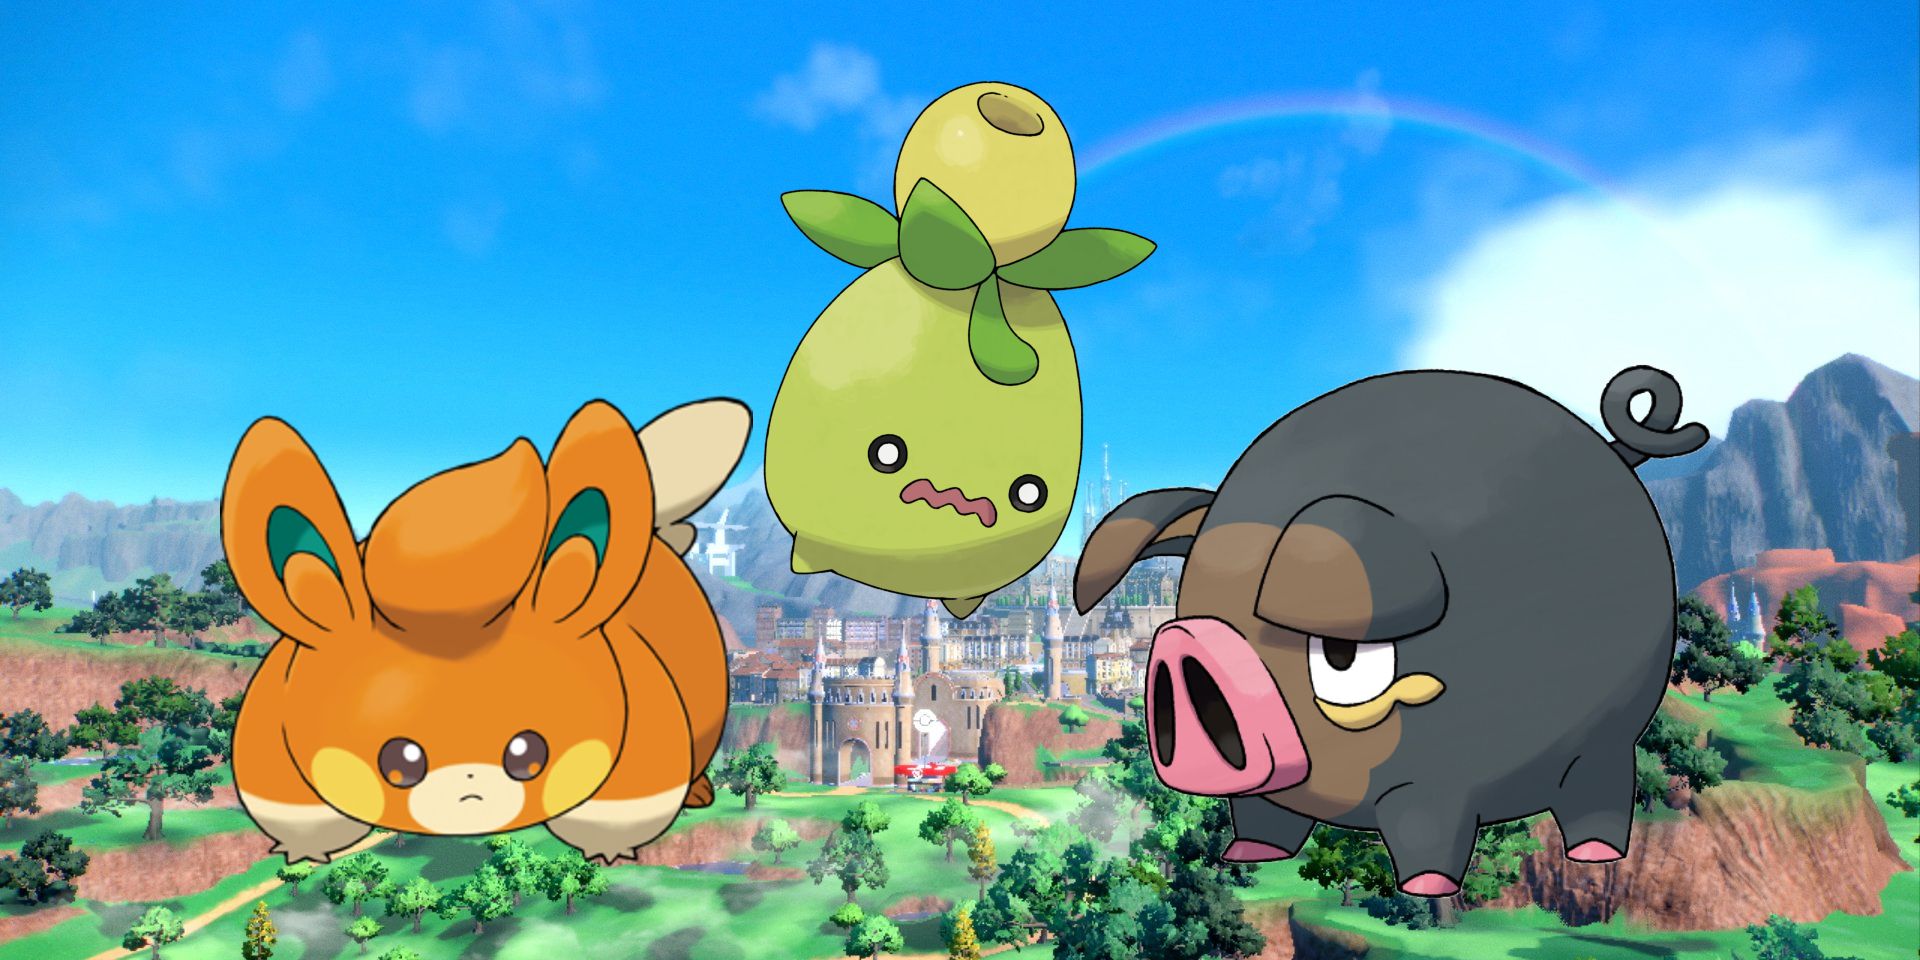 Blended image showing Smoliv, Pawmi, and Lechonk from Pókémon Scarlet & Violet.